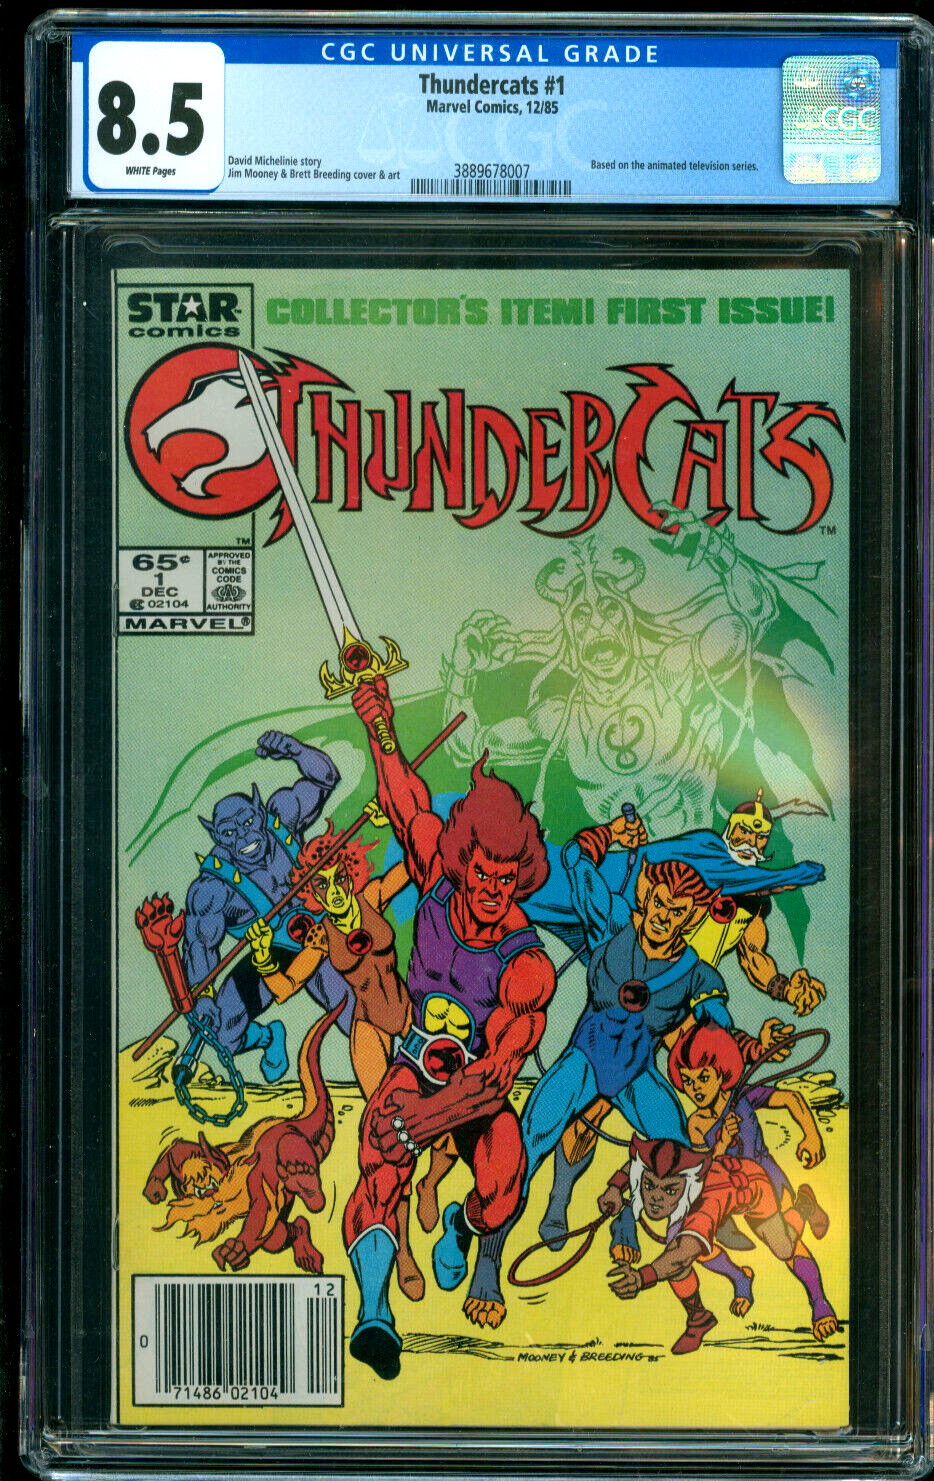 Thundercats #1 1st Appearance in Comics CGC 8.5 Newsstand Variant 1985 Marvel